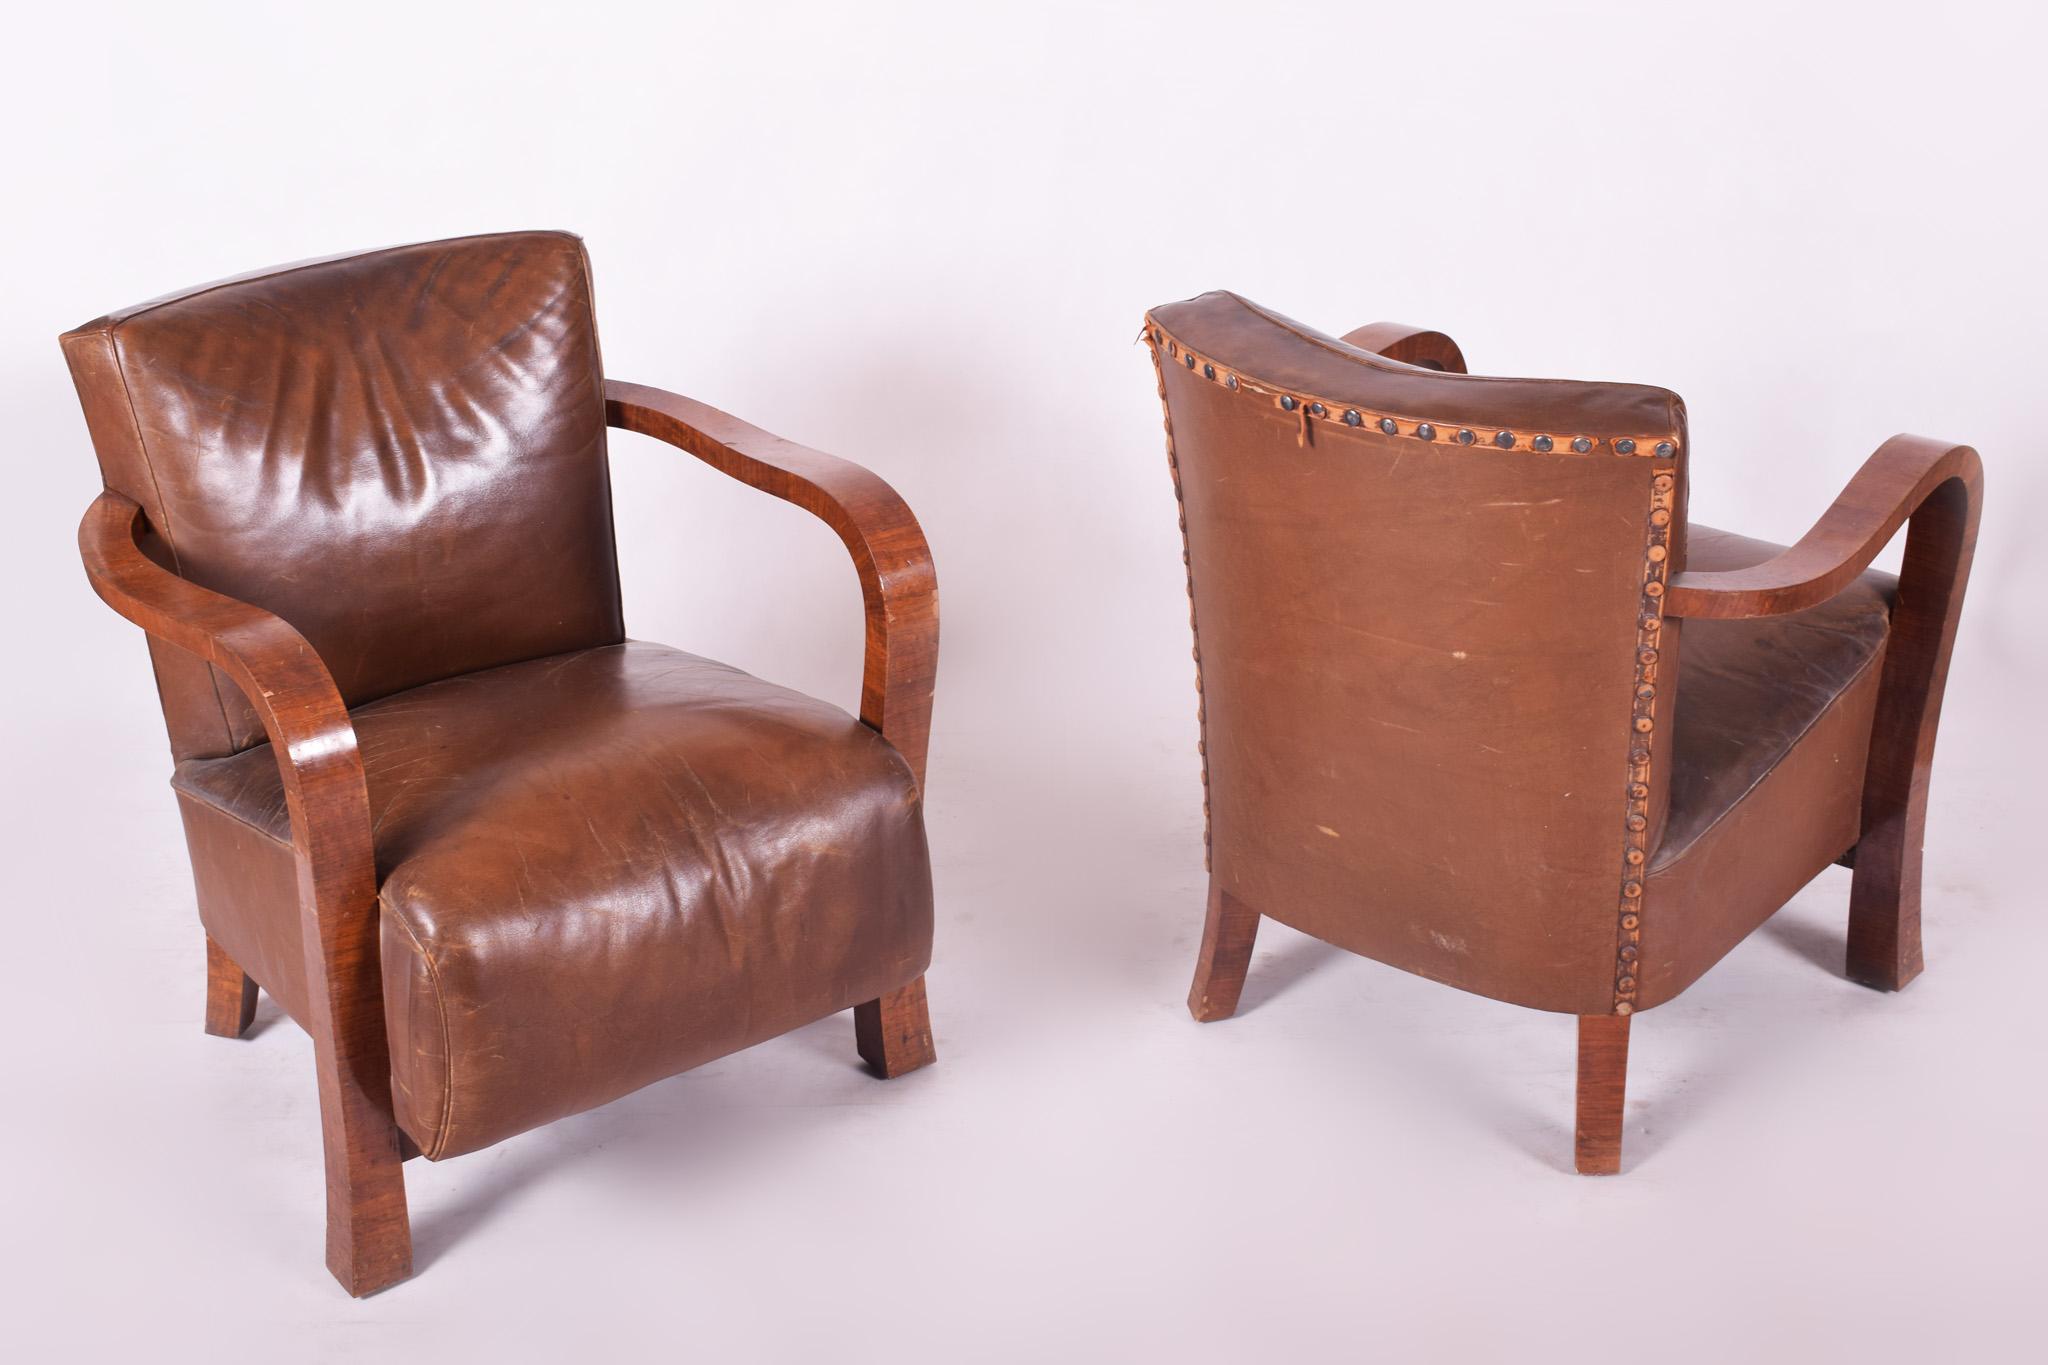 Brown Walnut Art Deco Three-Piece Suite, Preserved Condition and Leather, 1930s For Sale 4